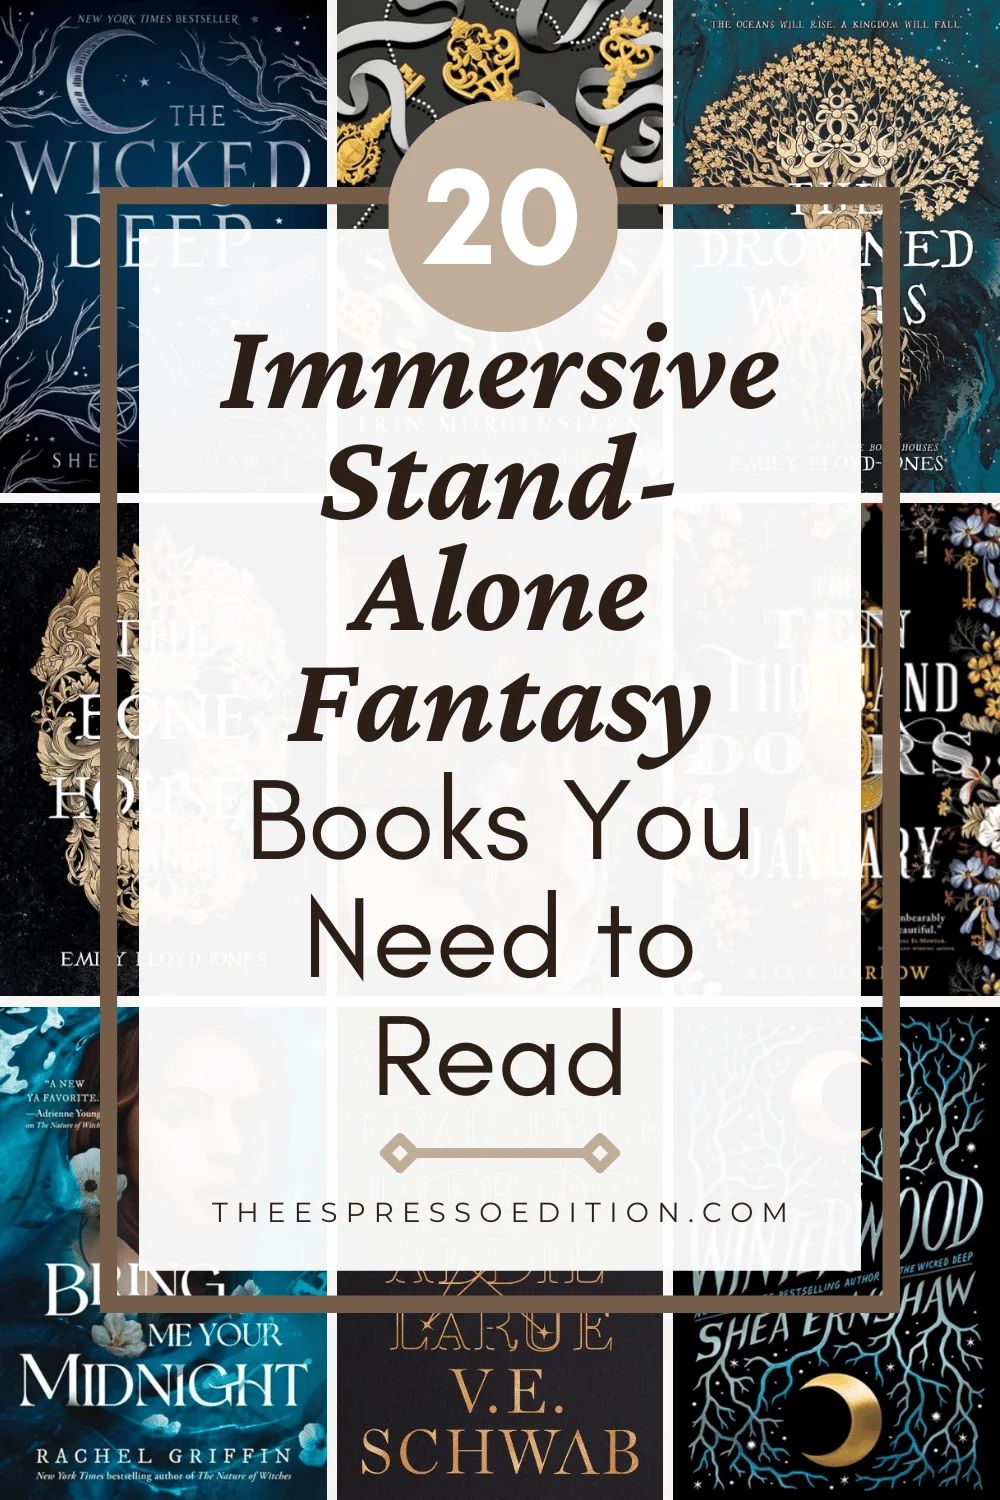 20 Immersive Stand-Alone Fantasy Books You Need to Read by The Espresso Edition cozy bookish blog